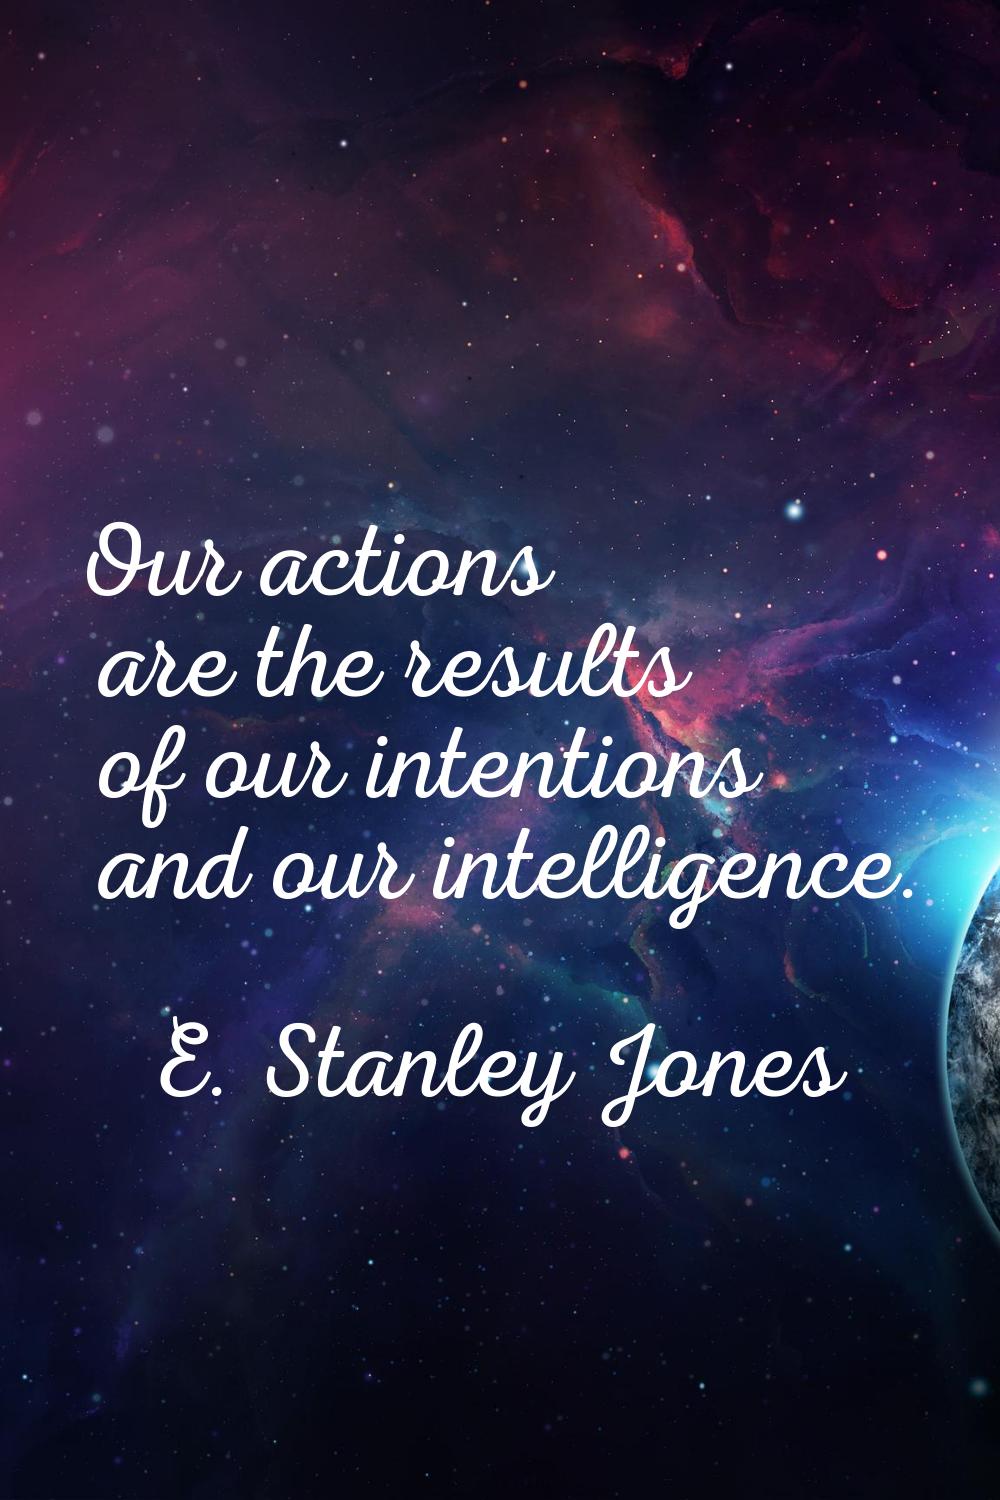 Our actions are the results of our intentions and our intelligence.